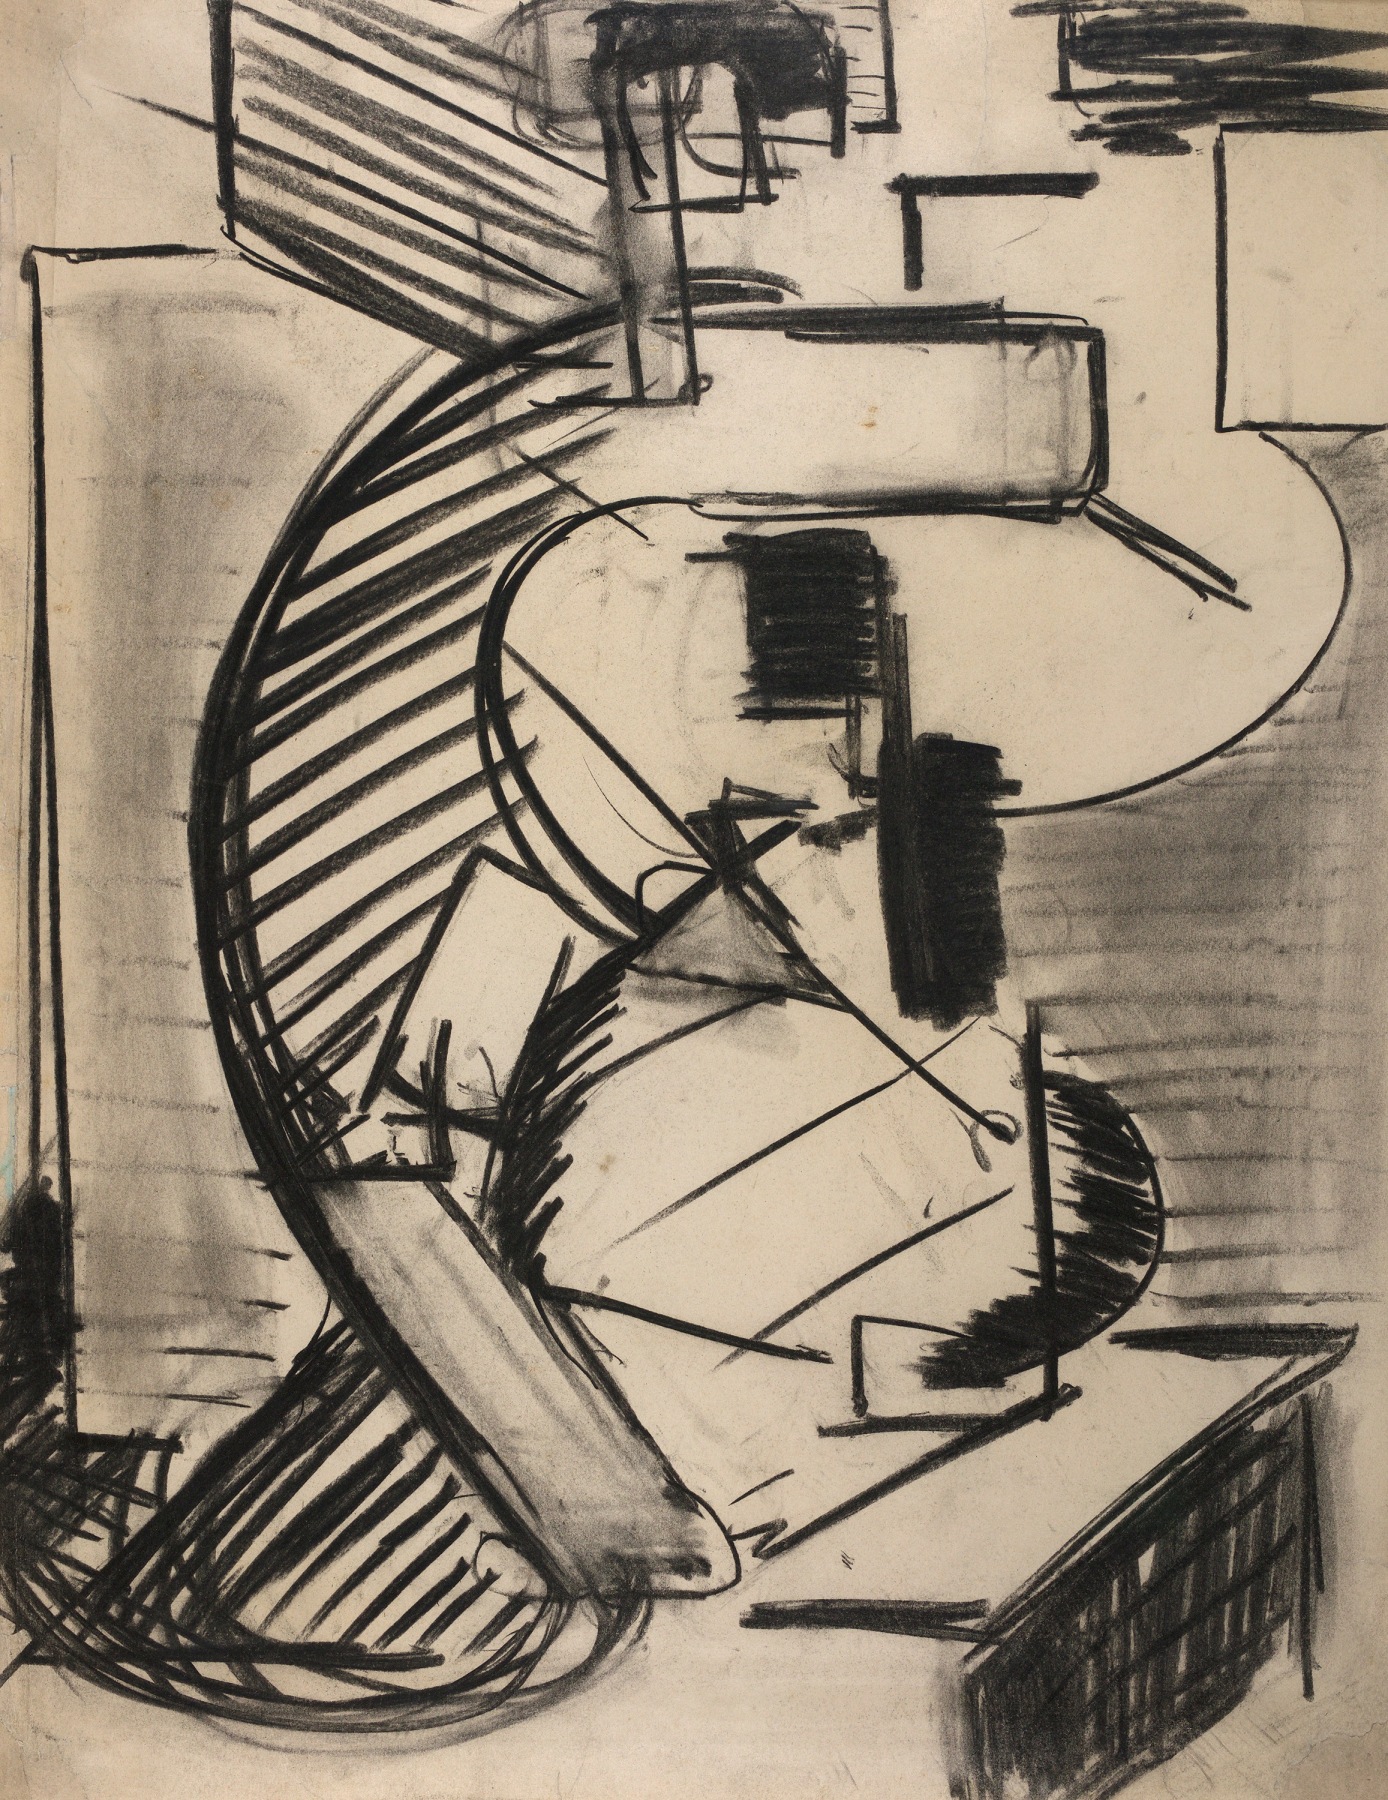 Mercedes Matter, Tudor City, 1928, Charcoal on paper, gestural charcoal drawing, Mercedes Matter was an American Abstract Expressionist painter.